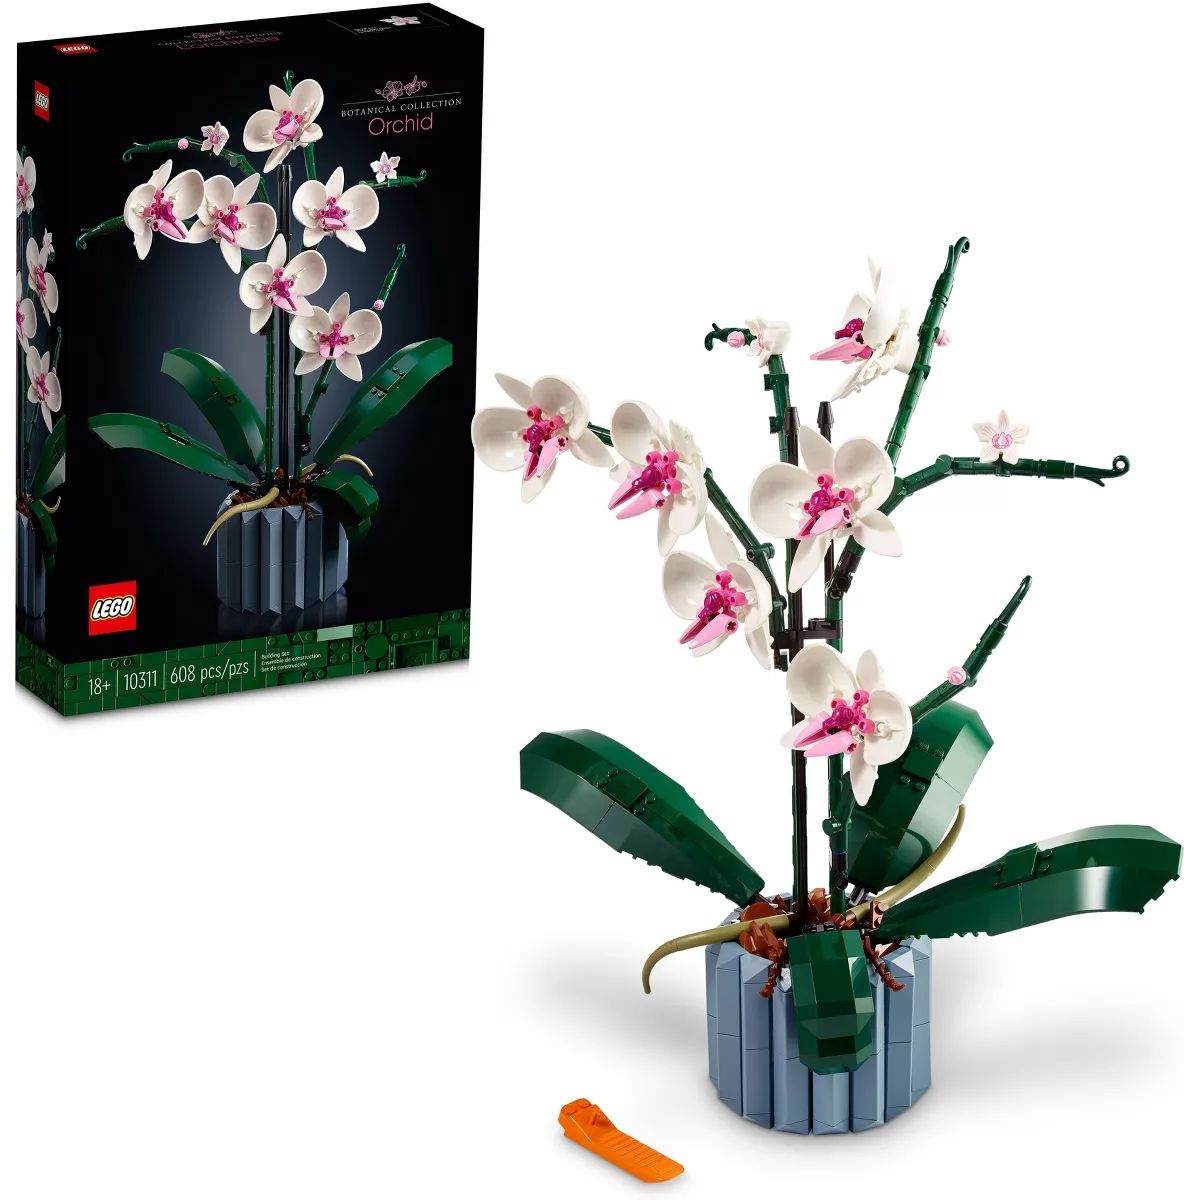 LEGO Icons Orchid Plant and Flowers Set 10311 | Target